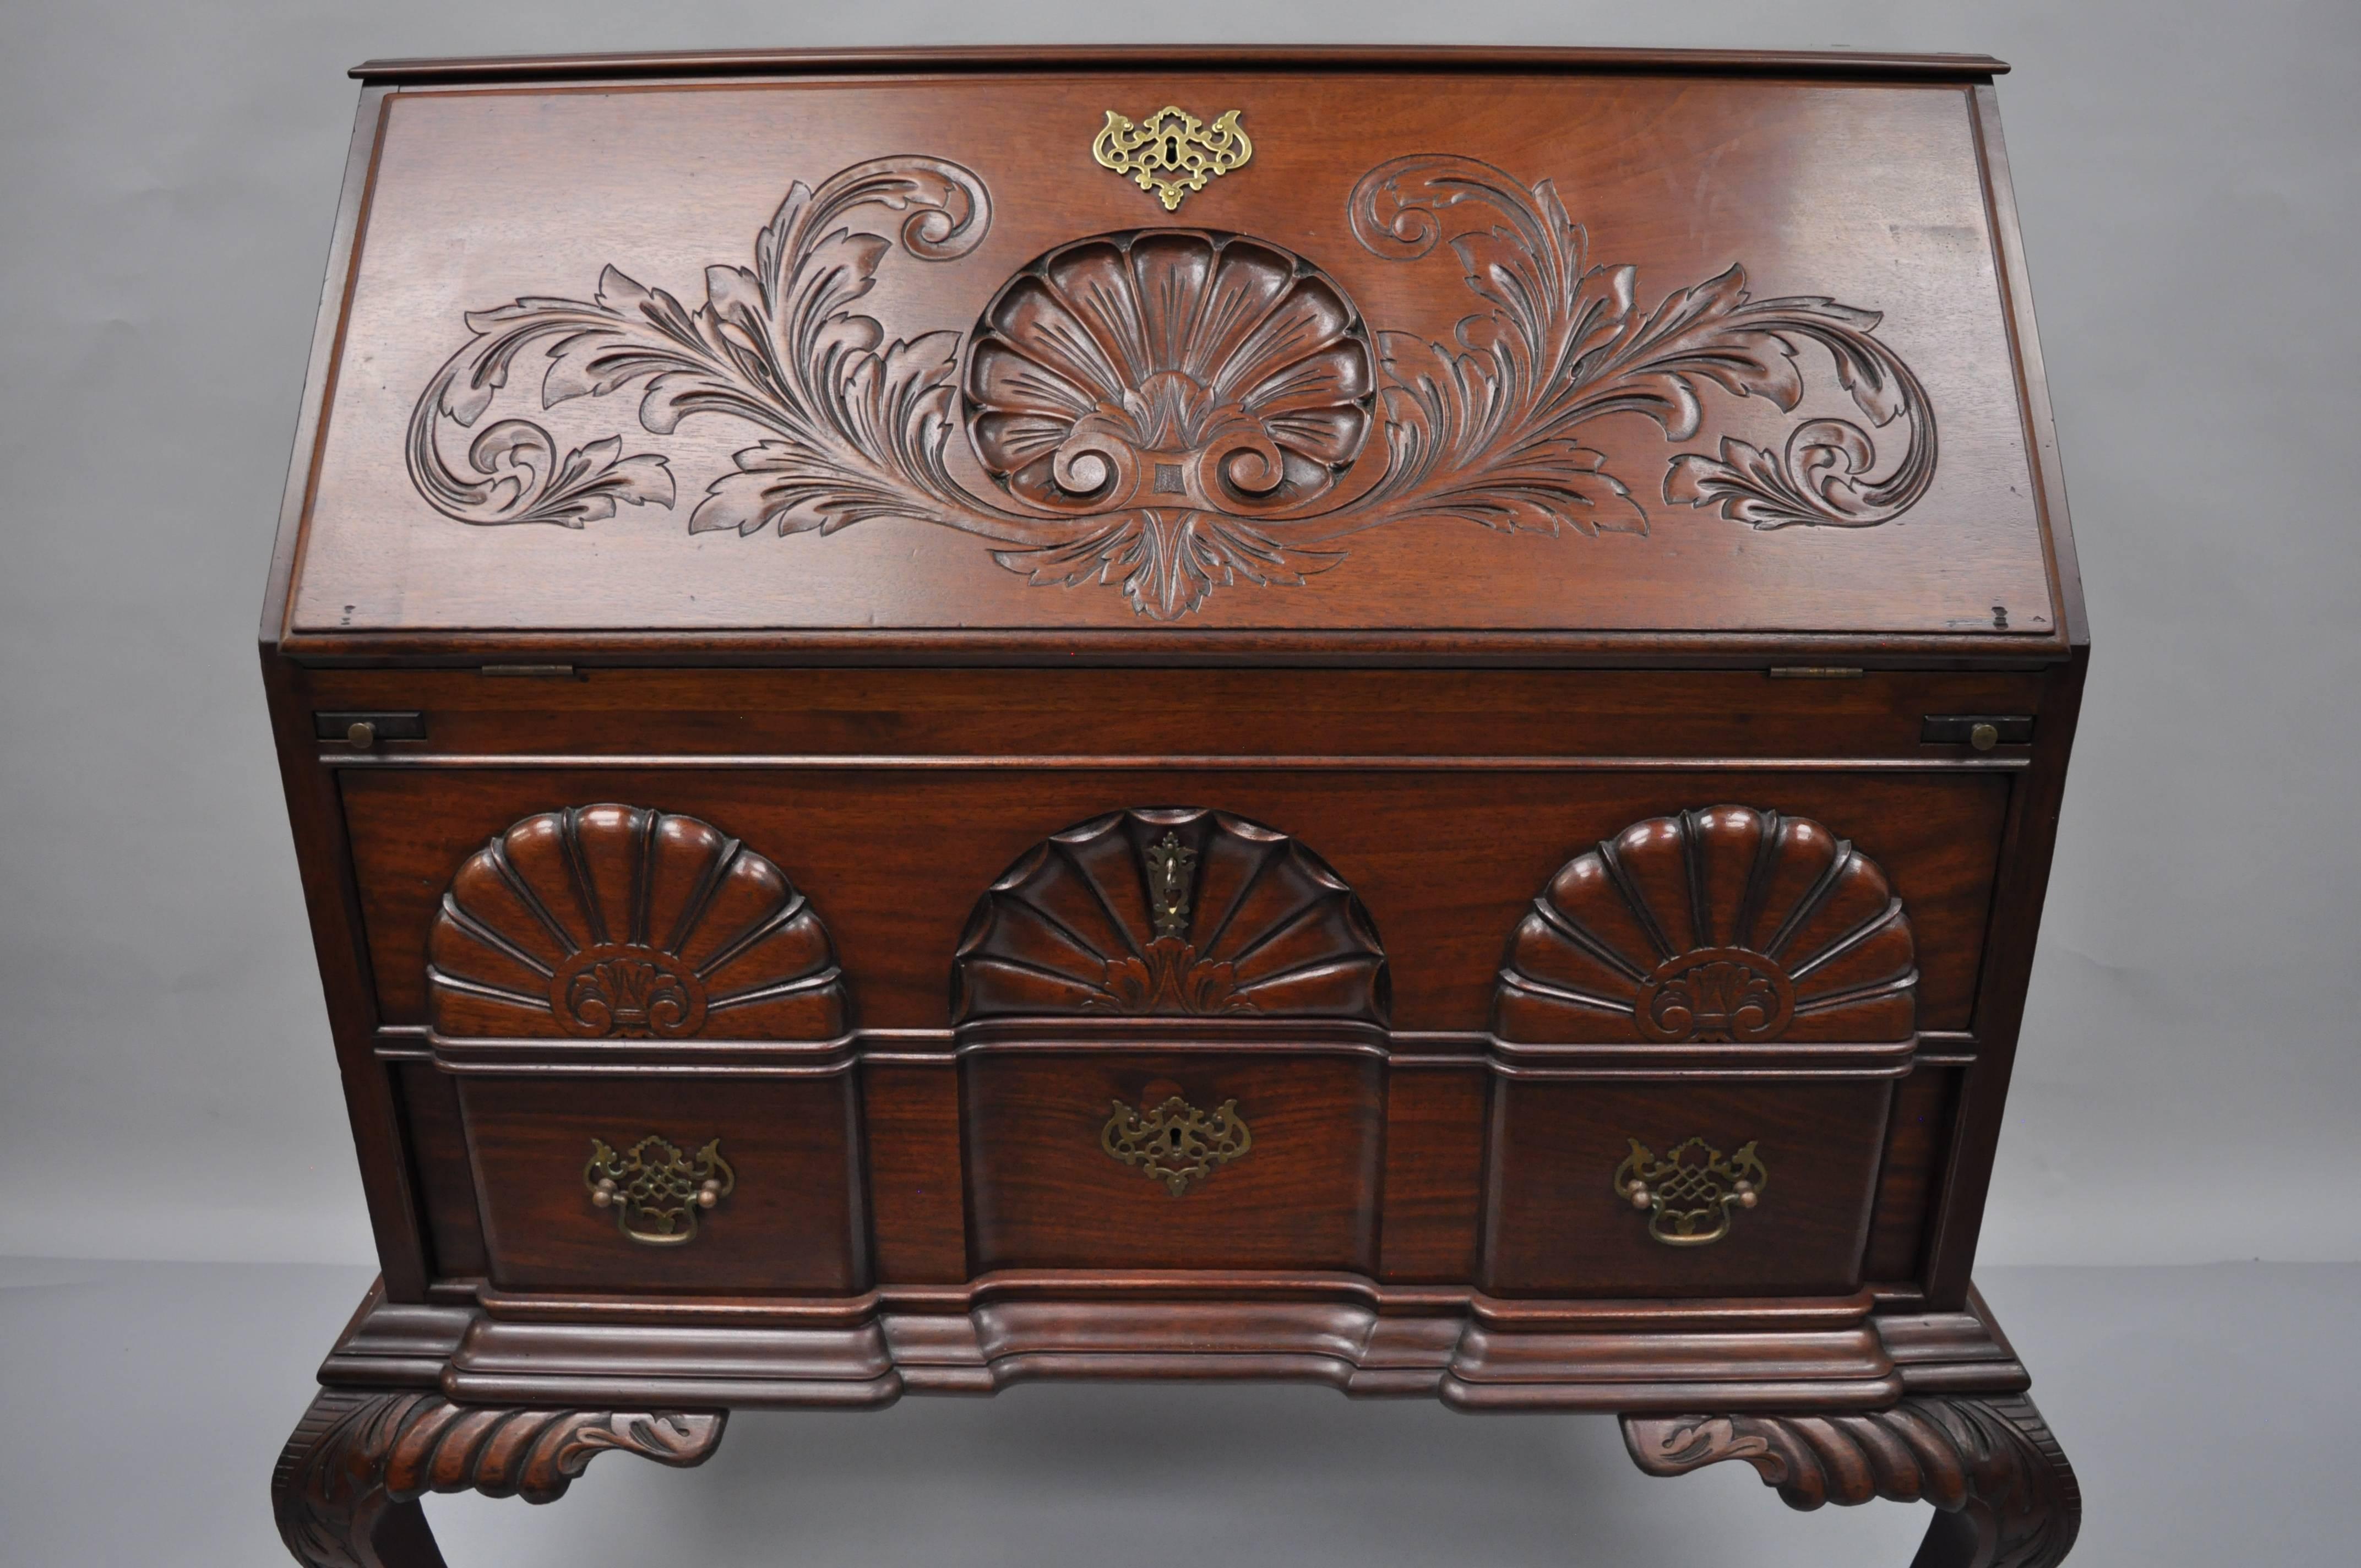 19th century Chippendale style mahogany blockfront secretary desk. Item features solid mahogany wood construction, dramatic shapely legs terminating with ball and claw feet on the front and back, carved knees, two dovetail constructed drawers, and